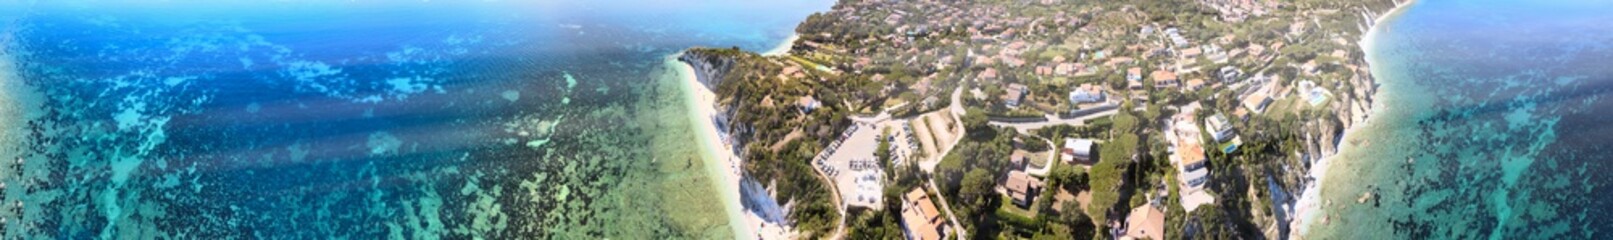 Elba Island, Italy. Amazing downward aerial view from drone of Capo Bianco and Padulella Beach near...